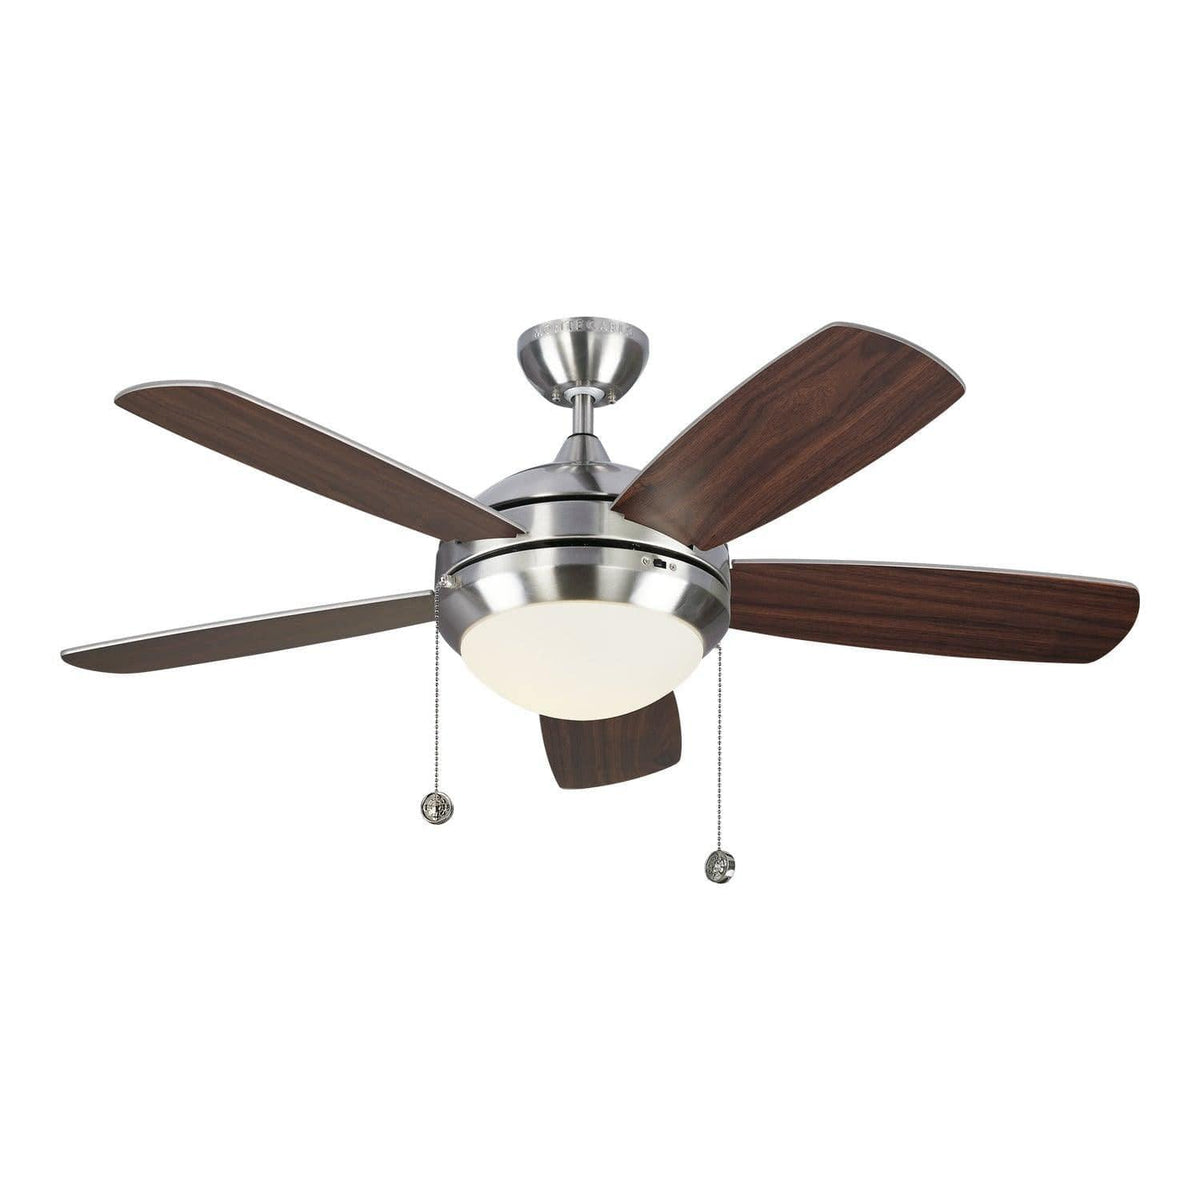 Visual Comfort Fan Collection - Discus Classic II 44" Ceiling Fan - 5DIC44BSD-V1 | Montreal Lighting & Hardware